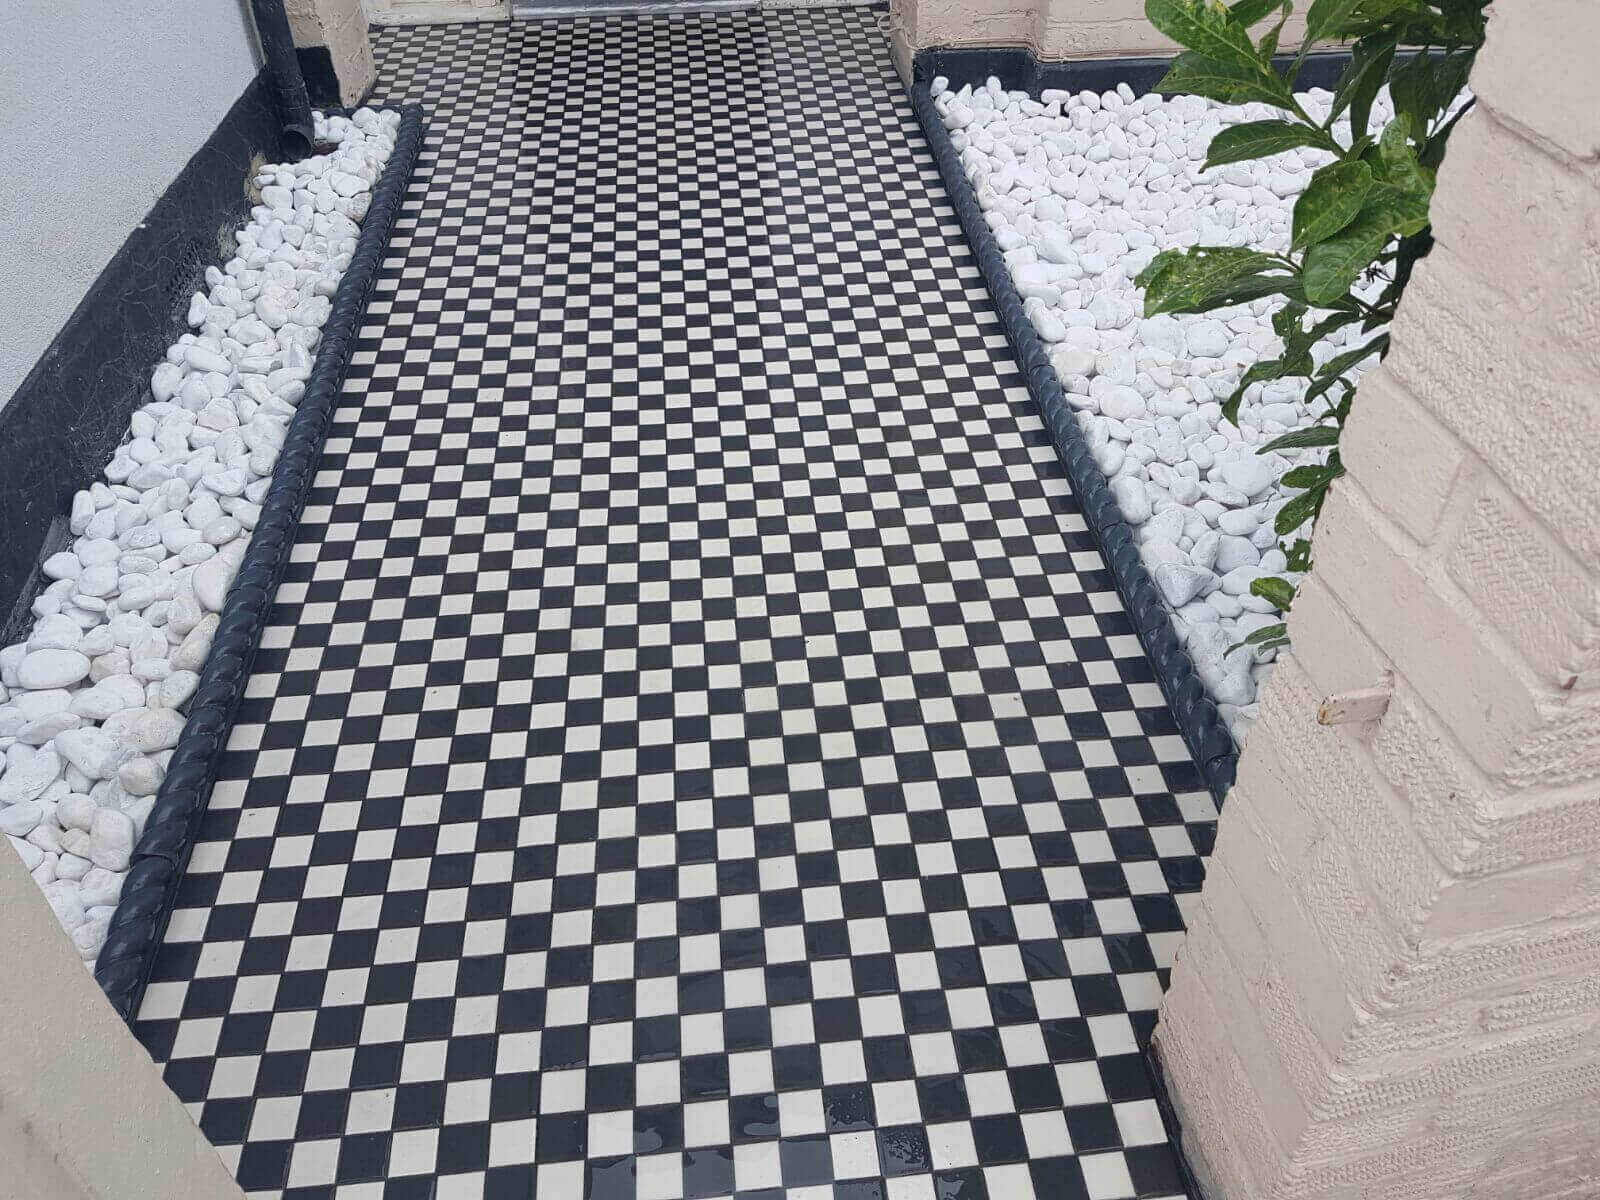  Victorian Pathway Tile Installation Contractor Parsons Green SW6